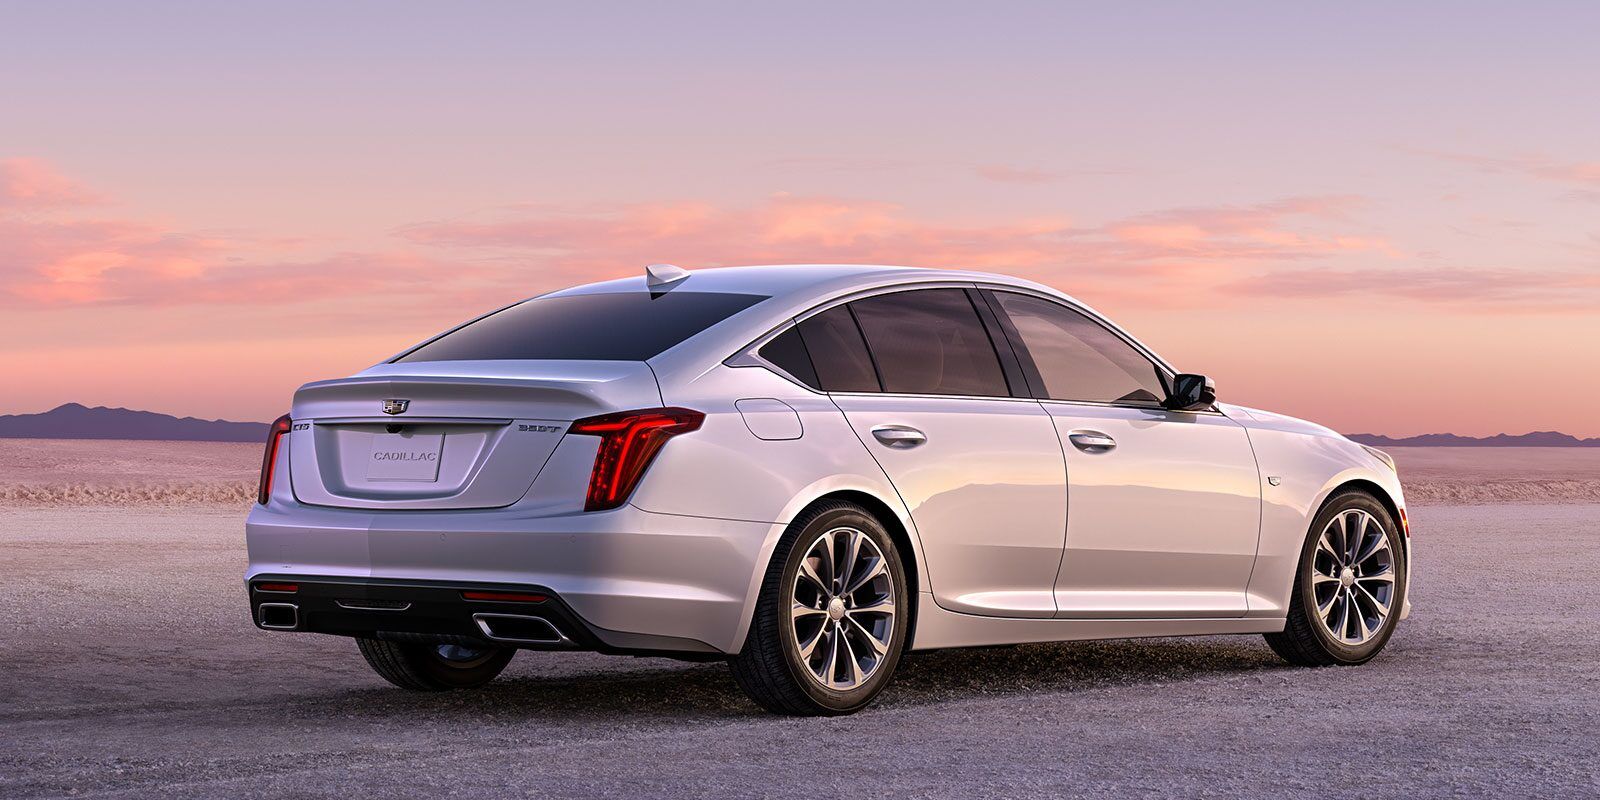 Rear 3/4 view of 2023 Cadillac CT5 parked on desert land.